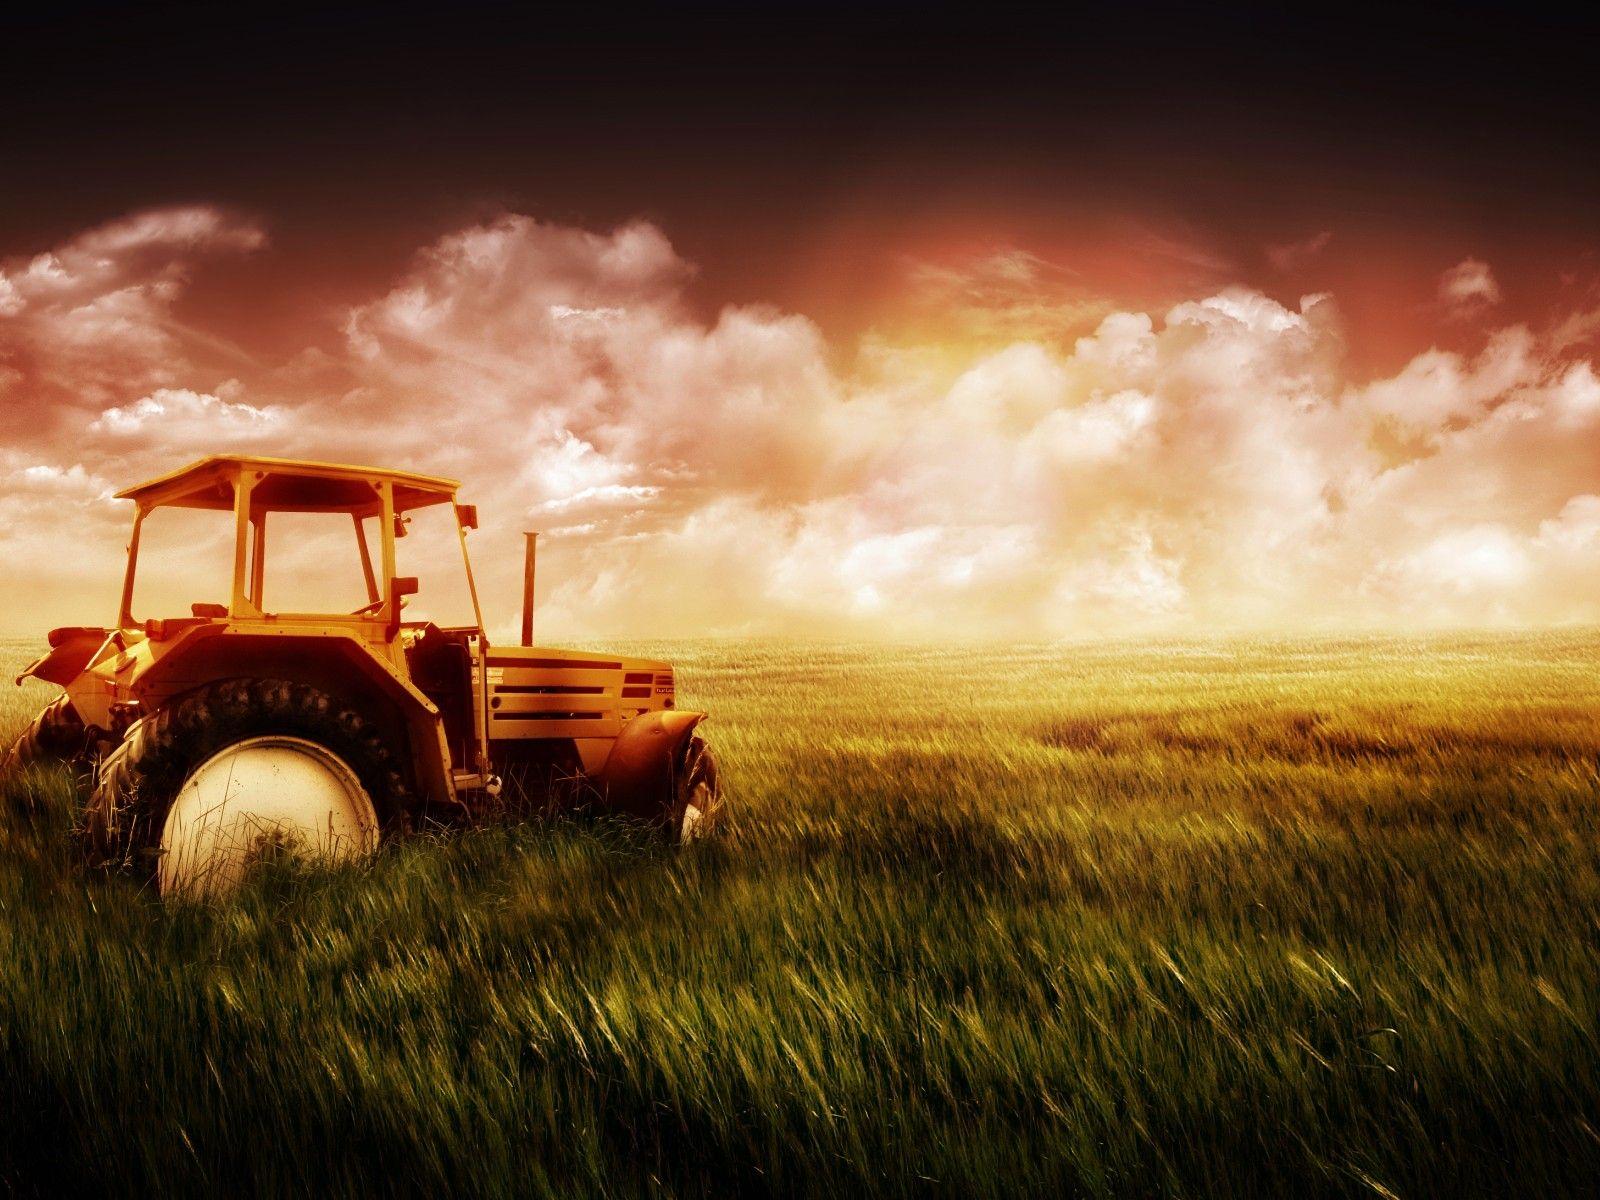 OLD FARM WALLPAPERS. OLD FARM STOCK PHOTOS. Tractors, Field